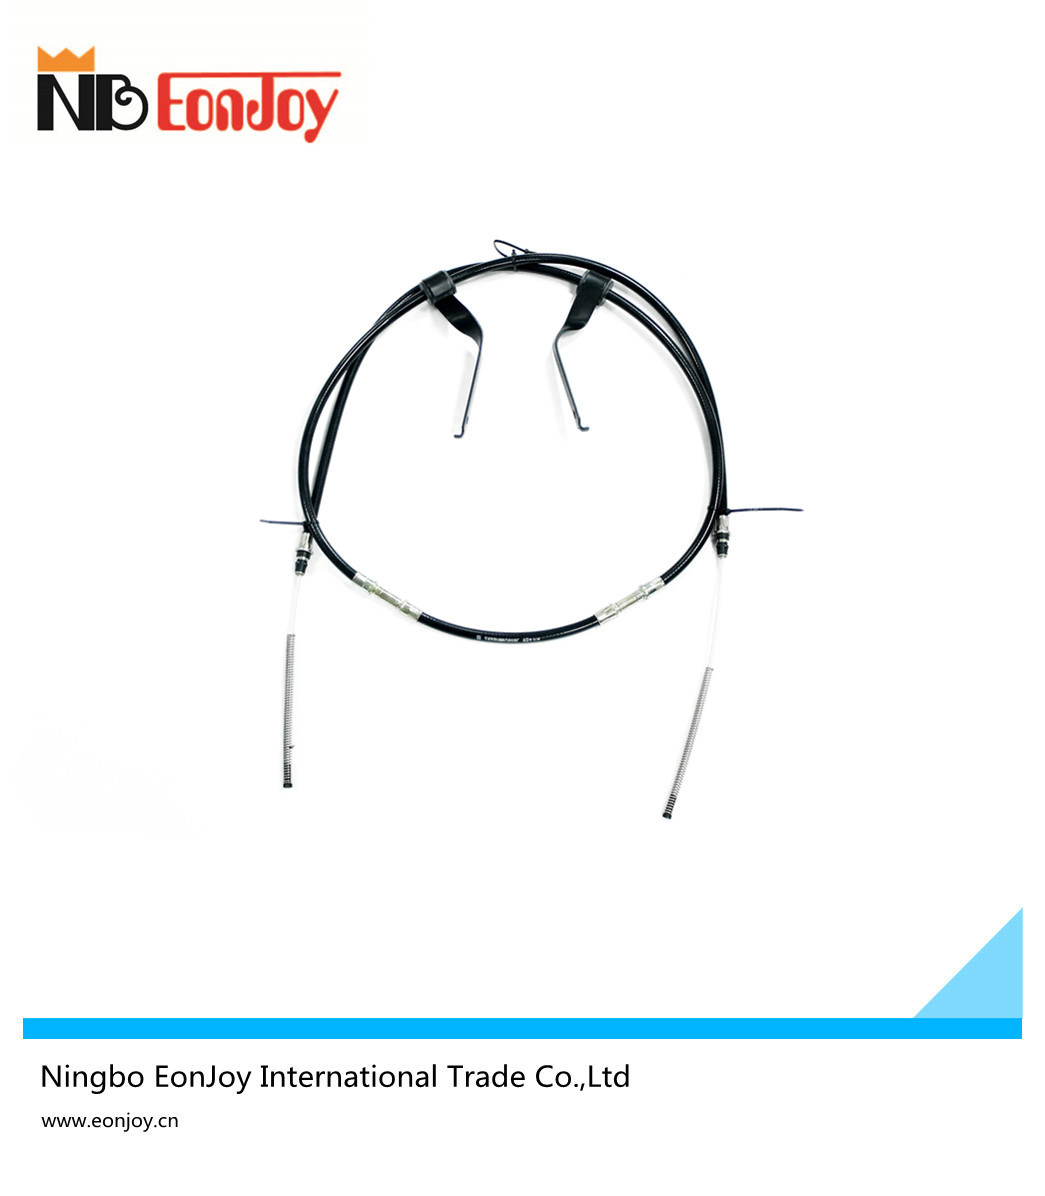 Hand Brake Cable for Ford Transit of Jiangling Motors (AD)